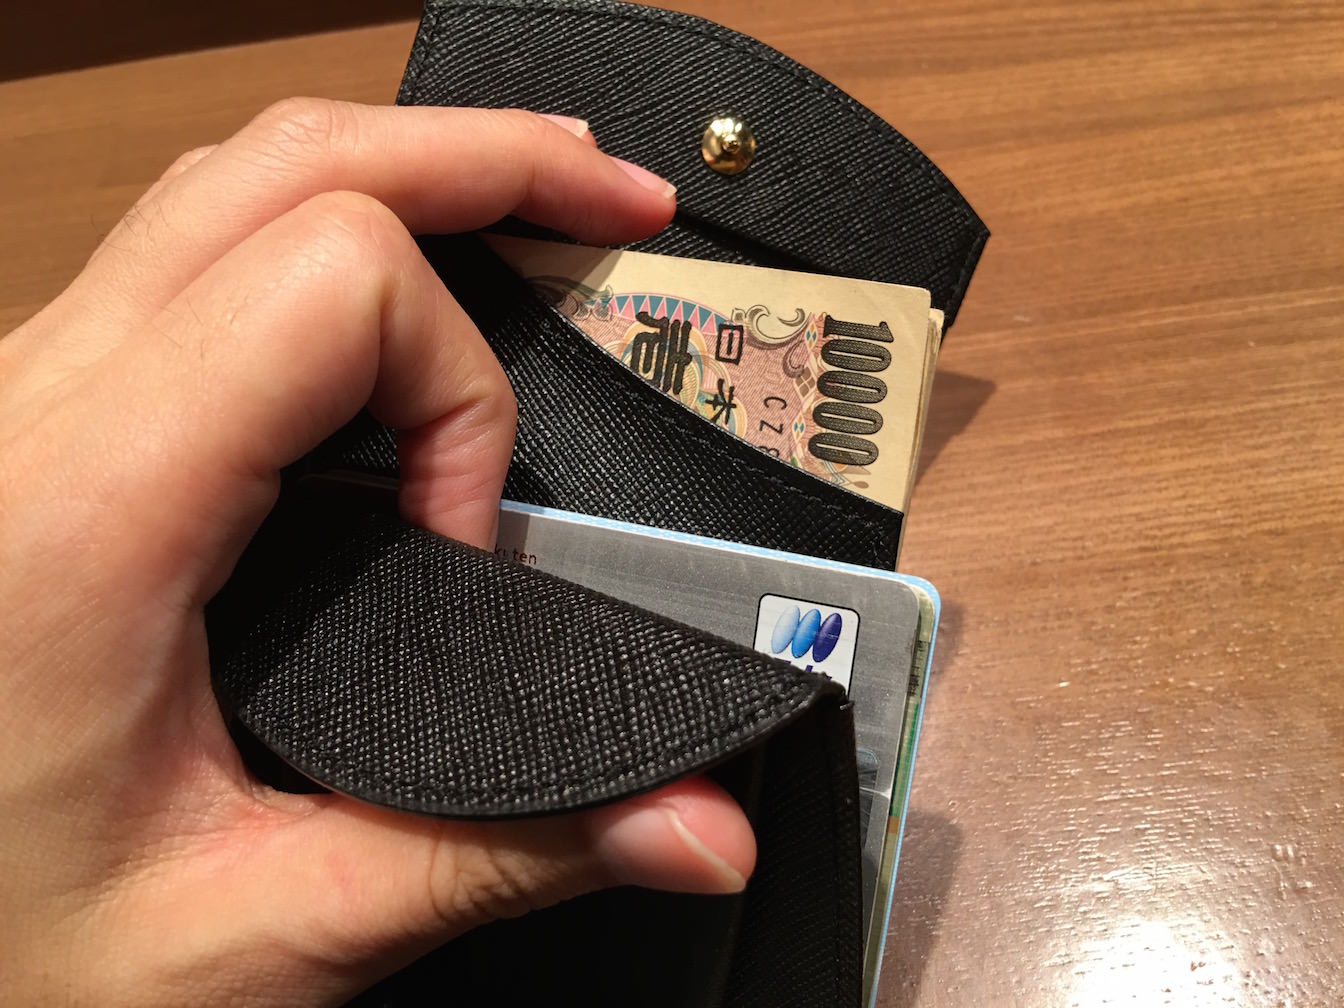 Hammock wallet compact first impression 12